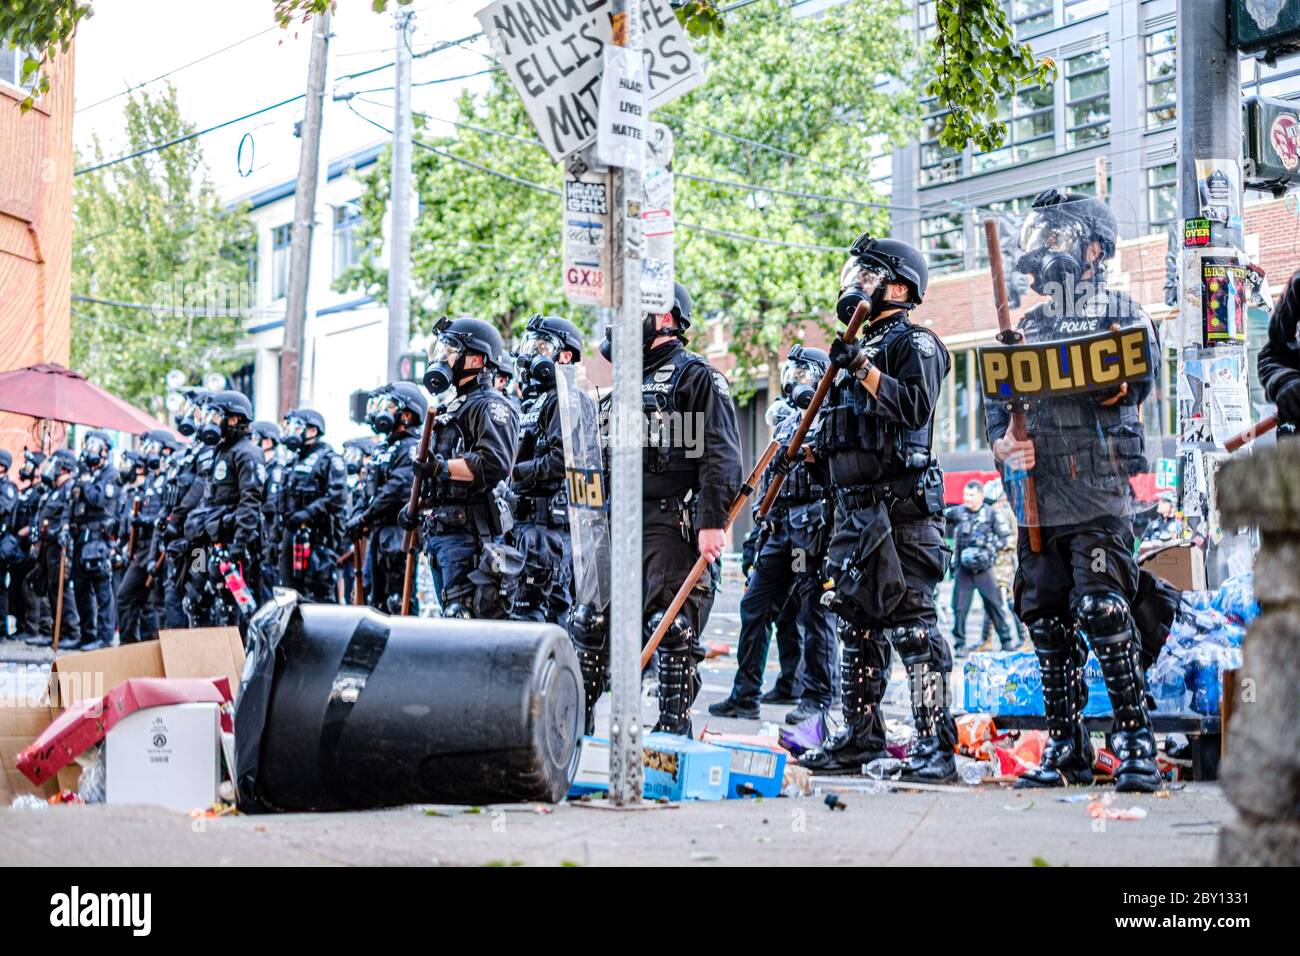 SEATTLE, USA - JUNE 6, 2020: Seattle Police holds the perimeter after dispersing demonstrators with flash bangs and pepper spray Stock Photo